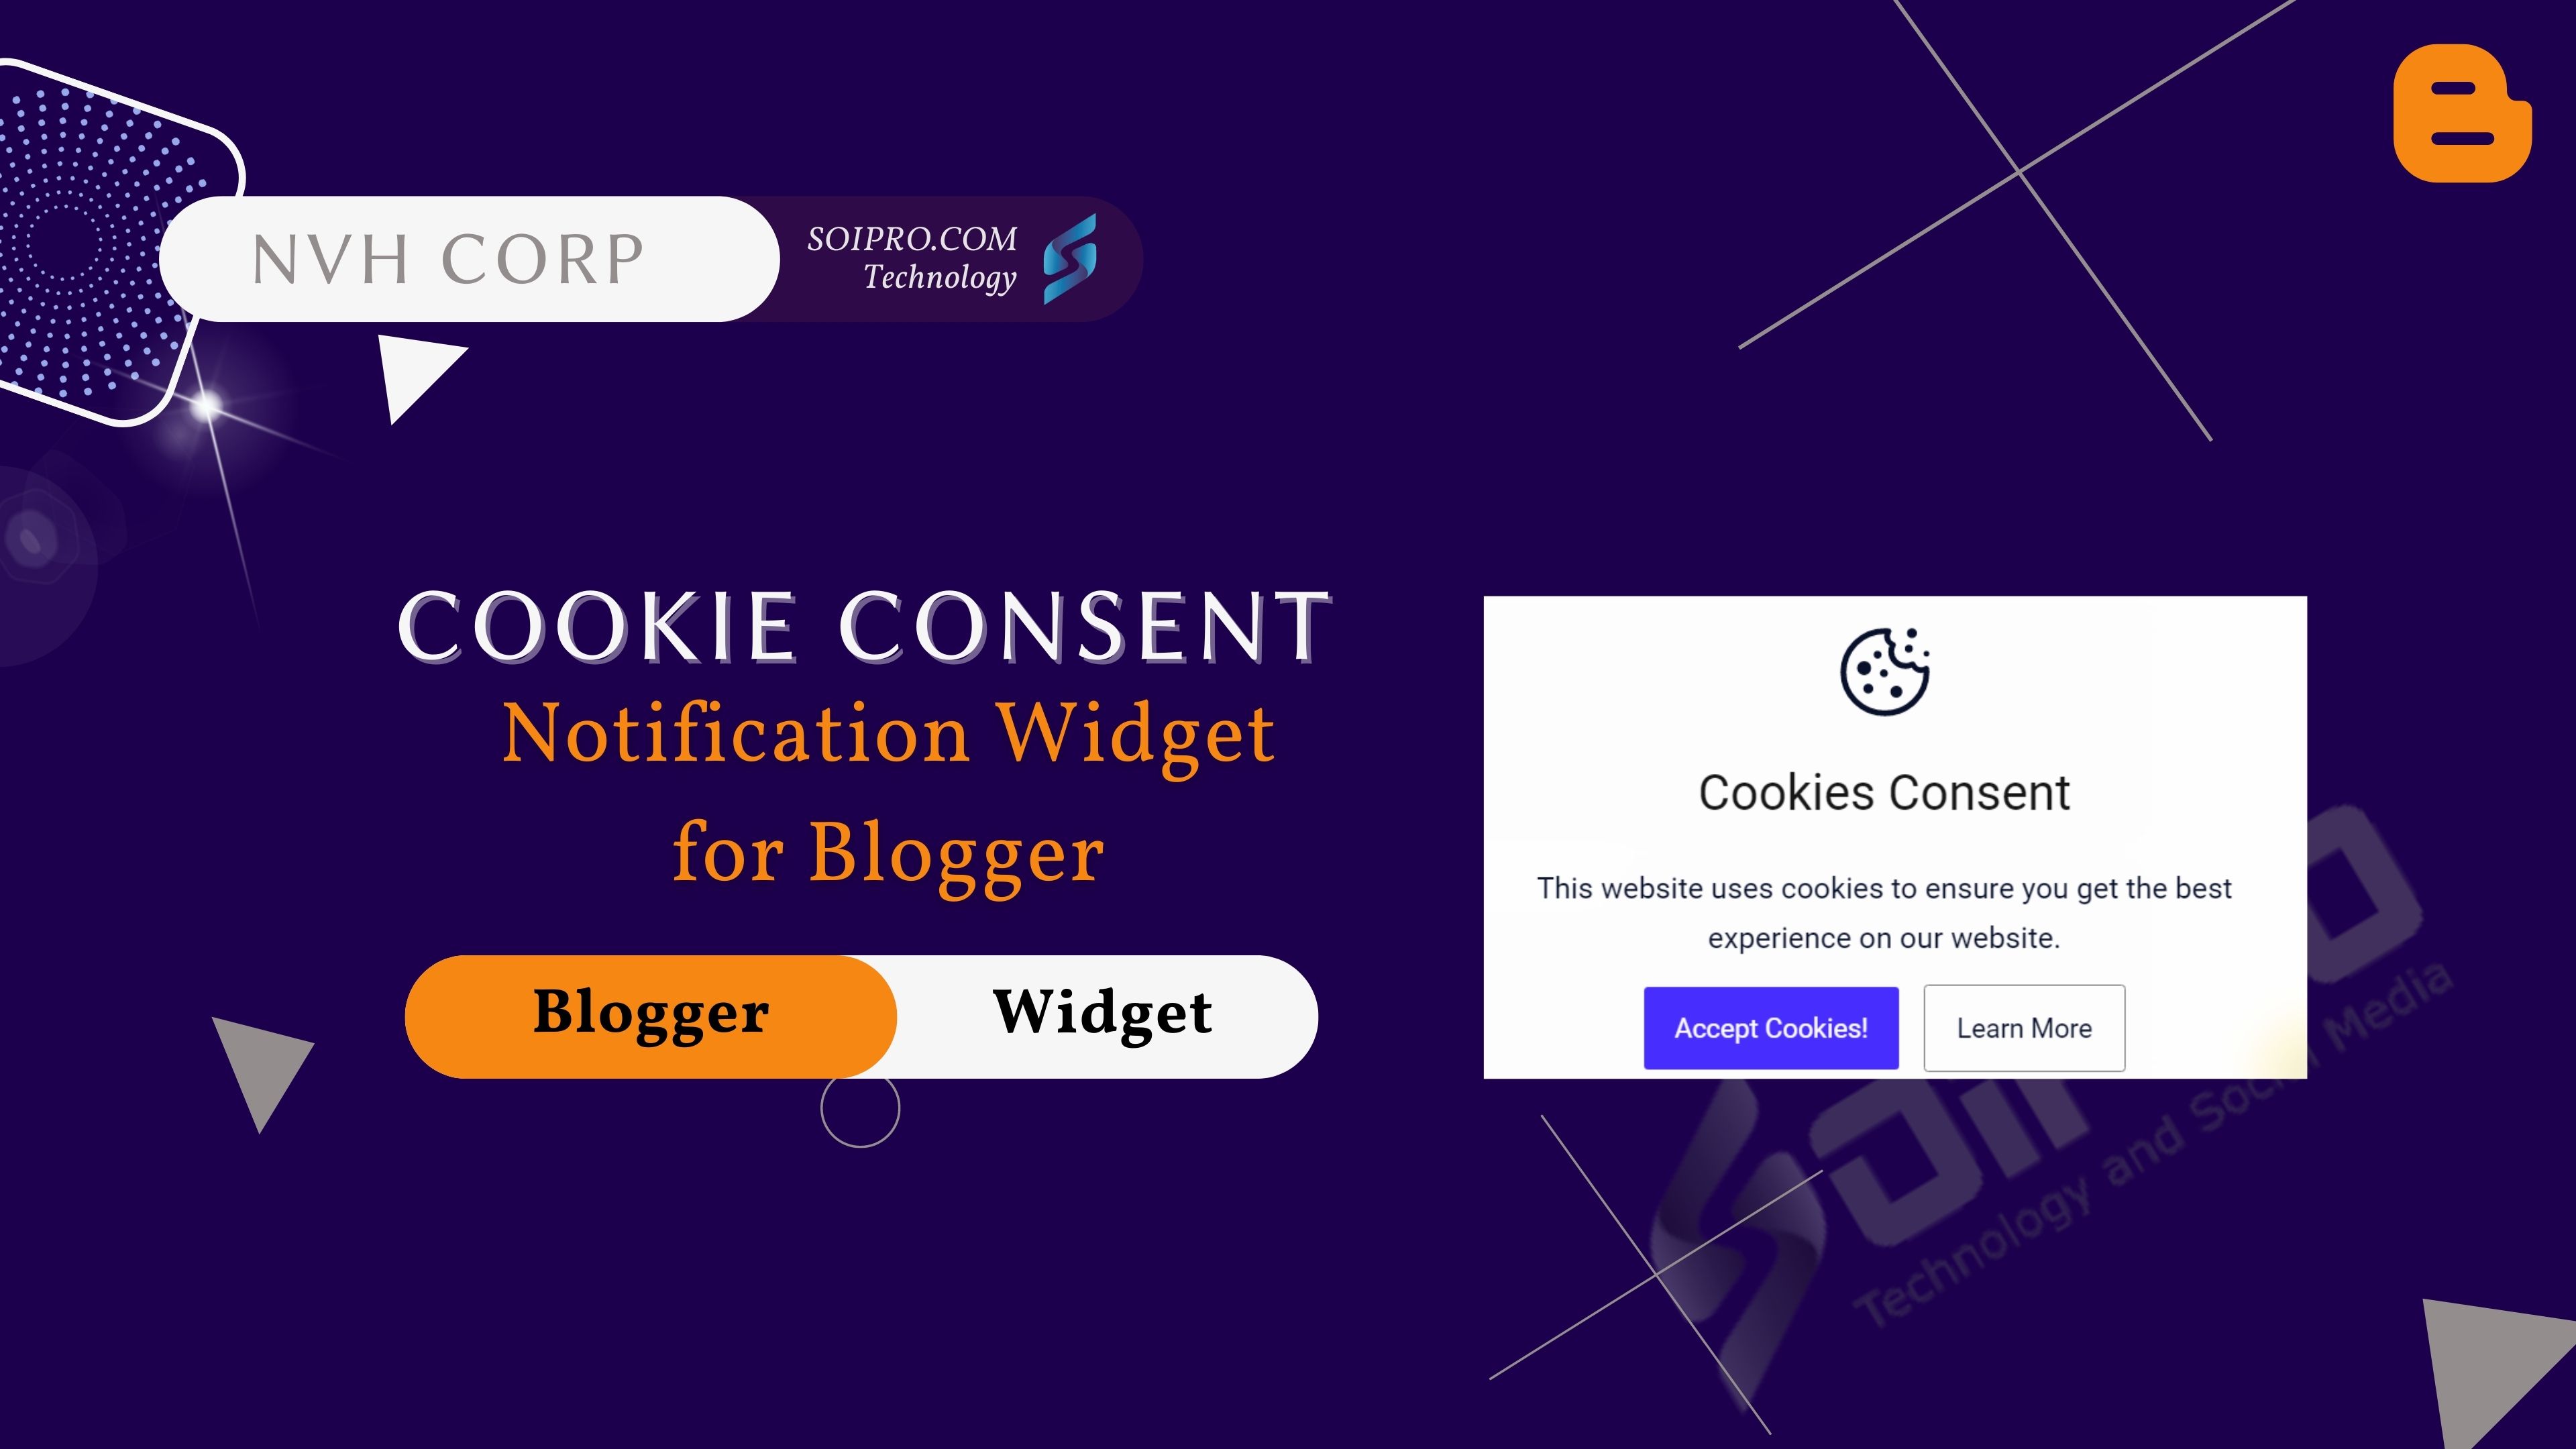 Apply These 6 Secret Techniques To Improve Add Responsive Cookie Consent Notification Widget For Blogger